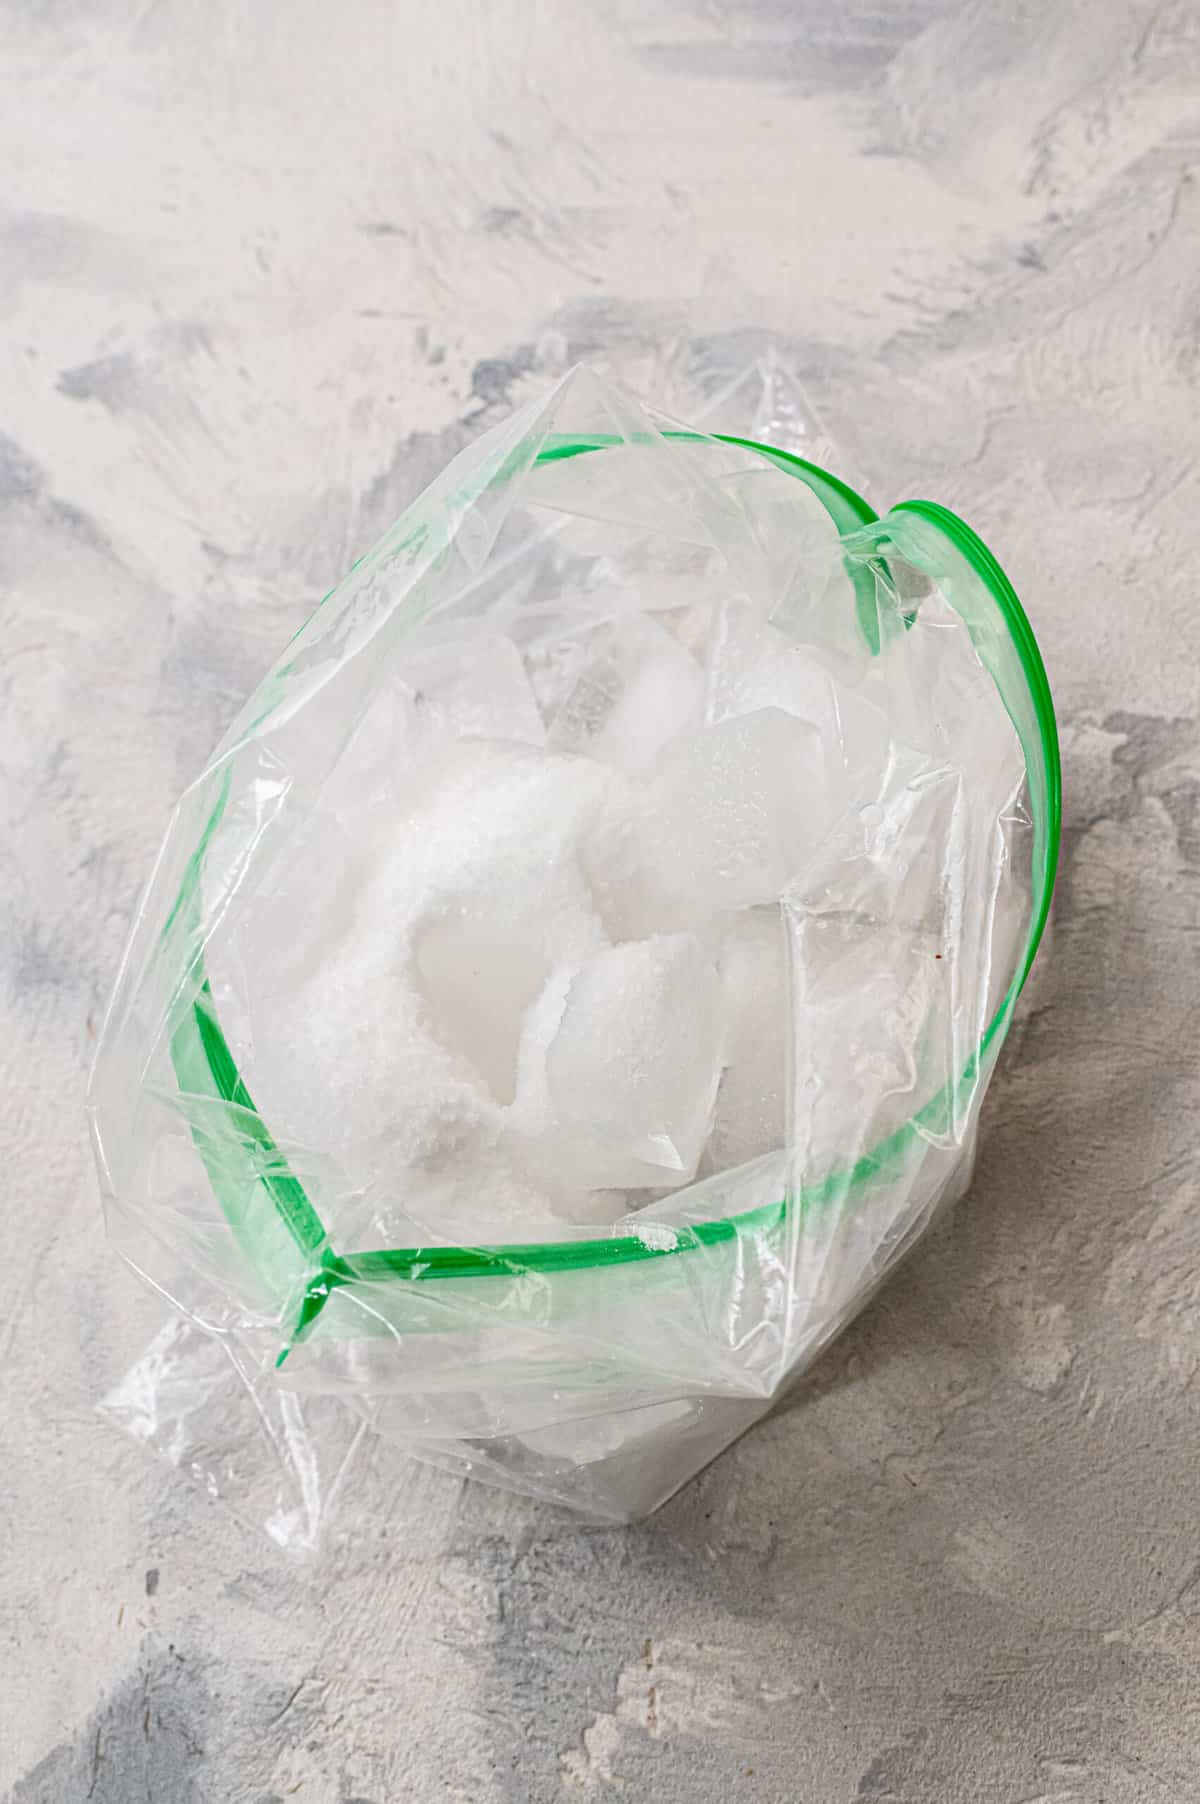 Place ice and Salt in a big zip lock bag.